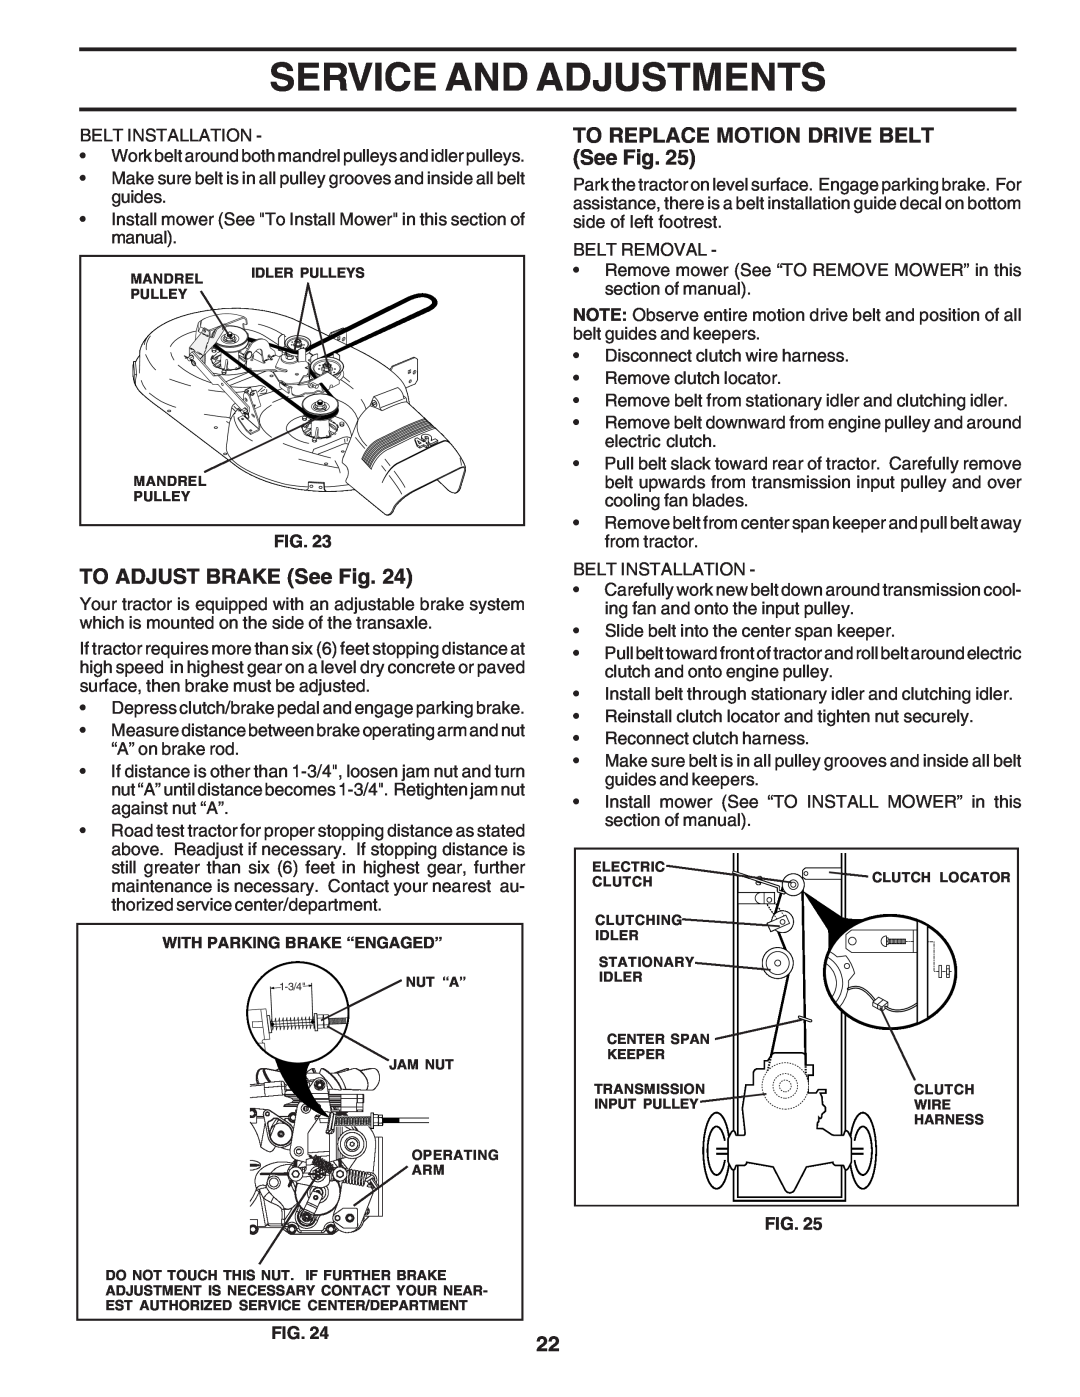 Poulan 183284 owner manual TO ADJUST BRAKE See Fig, TO REPLACE MOTION DRIVE BELT See Fig, Service And Adjustments 